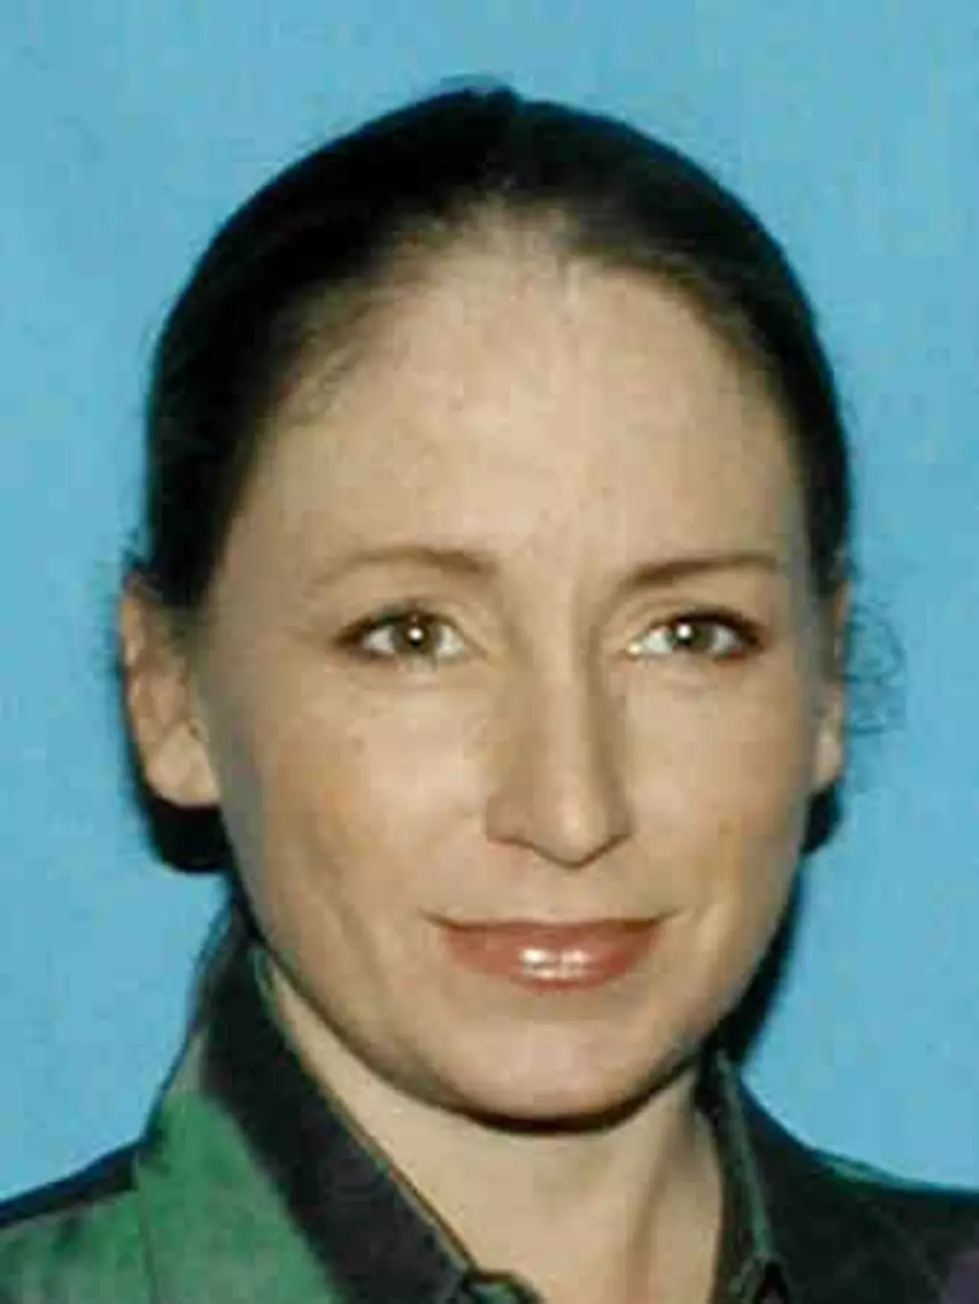 Foul Play Possibility In Missing Woman Case [Audio]